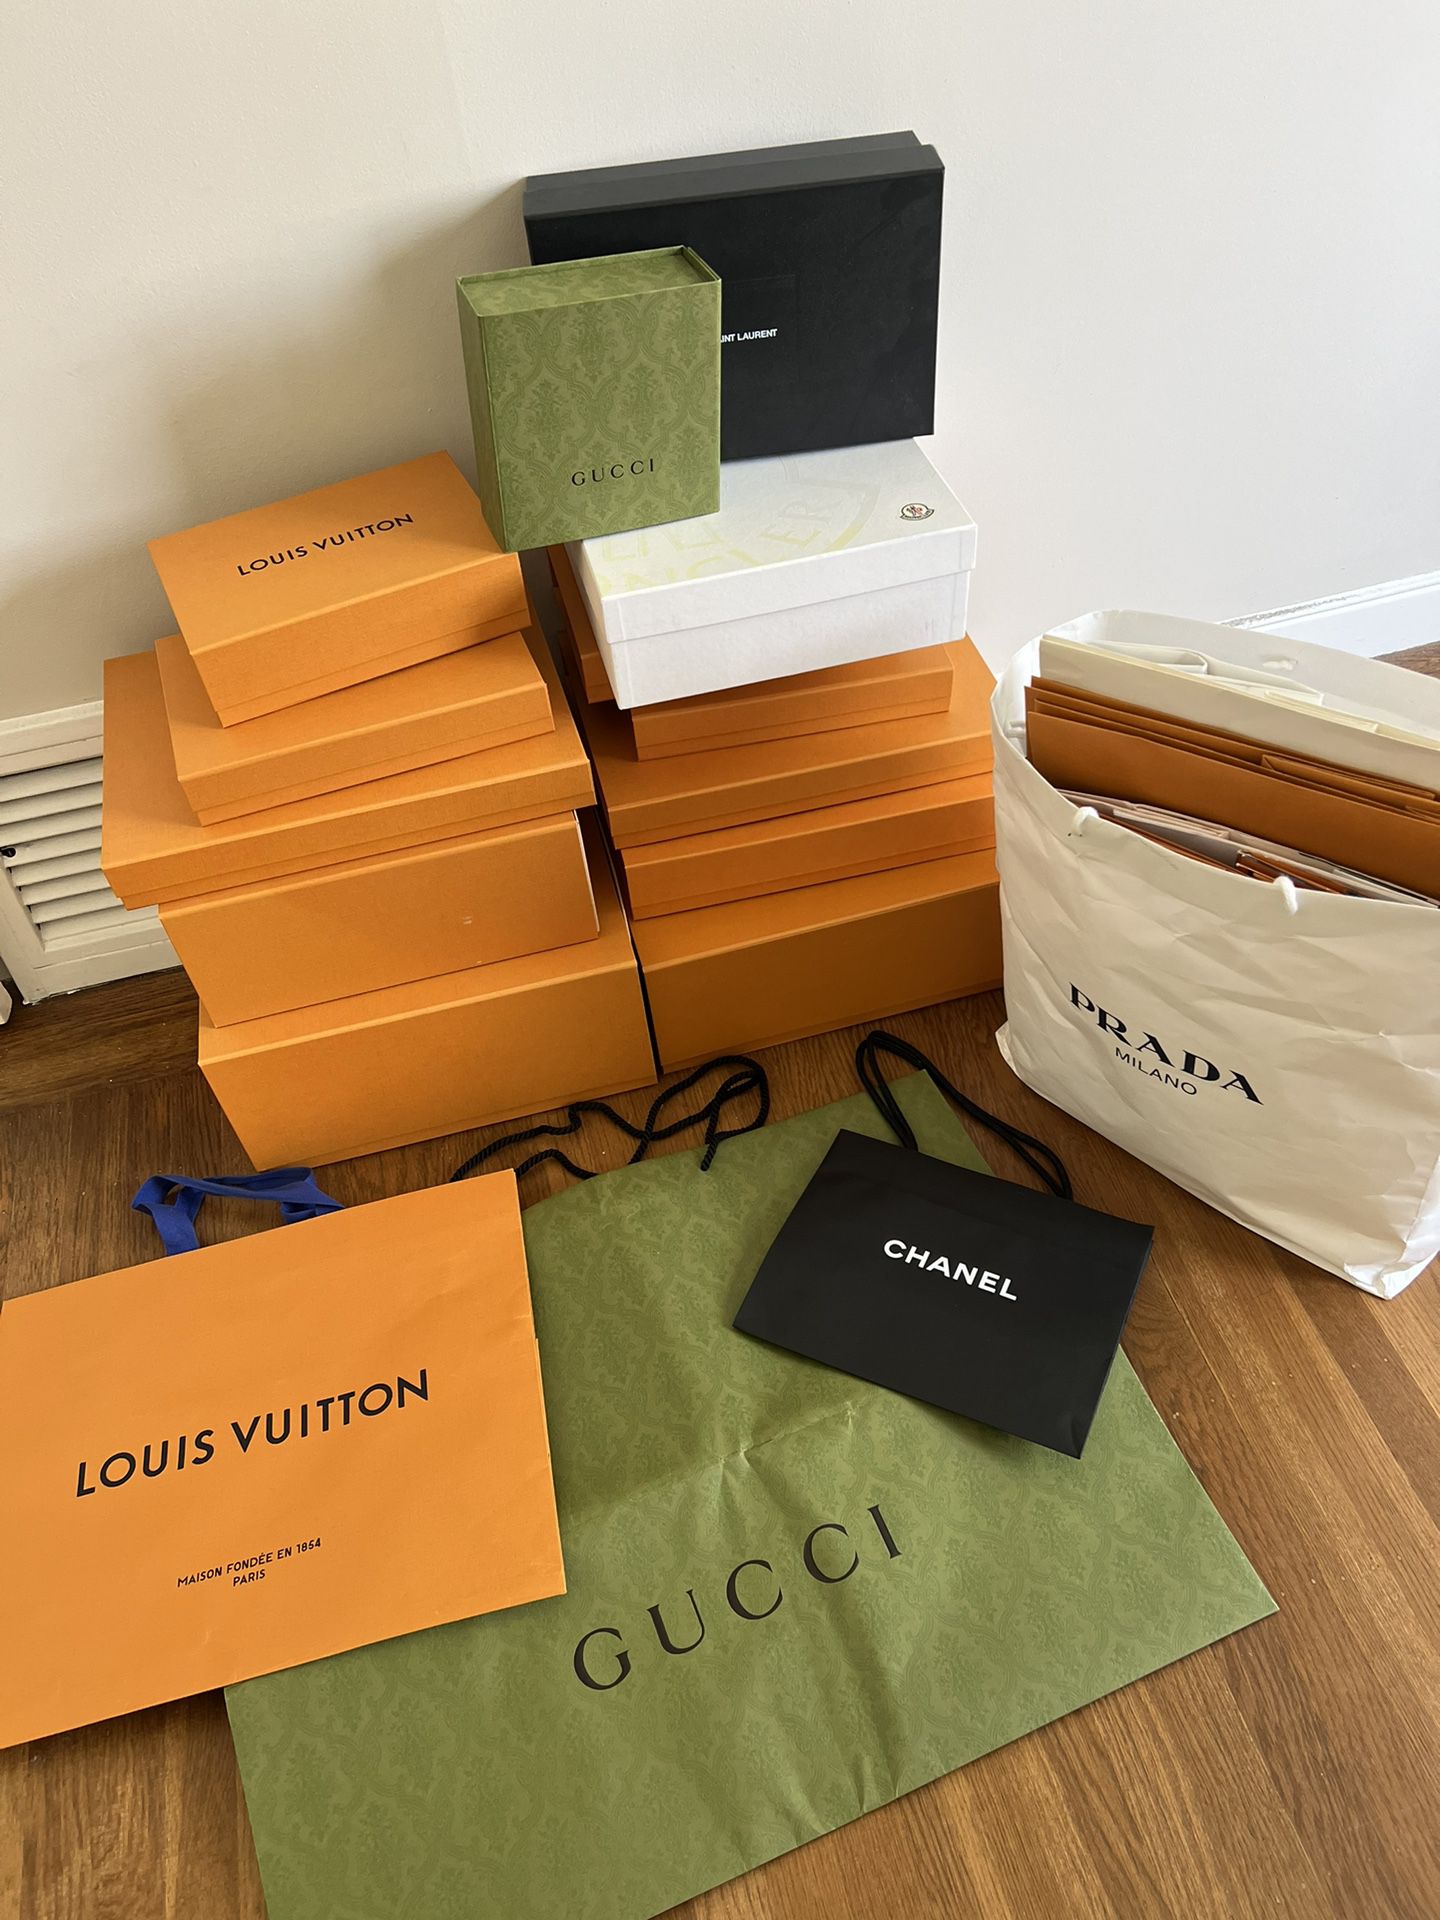 Luxury Designer Bags & Boxes LV Chanel Gucci